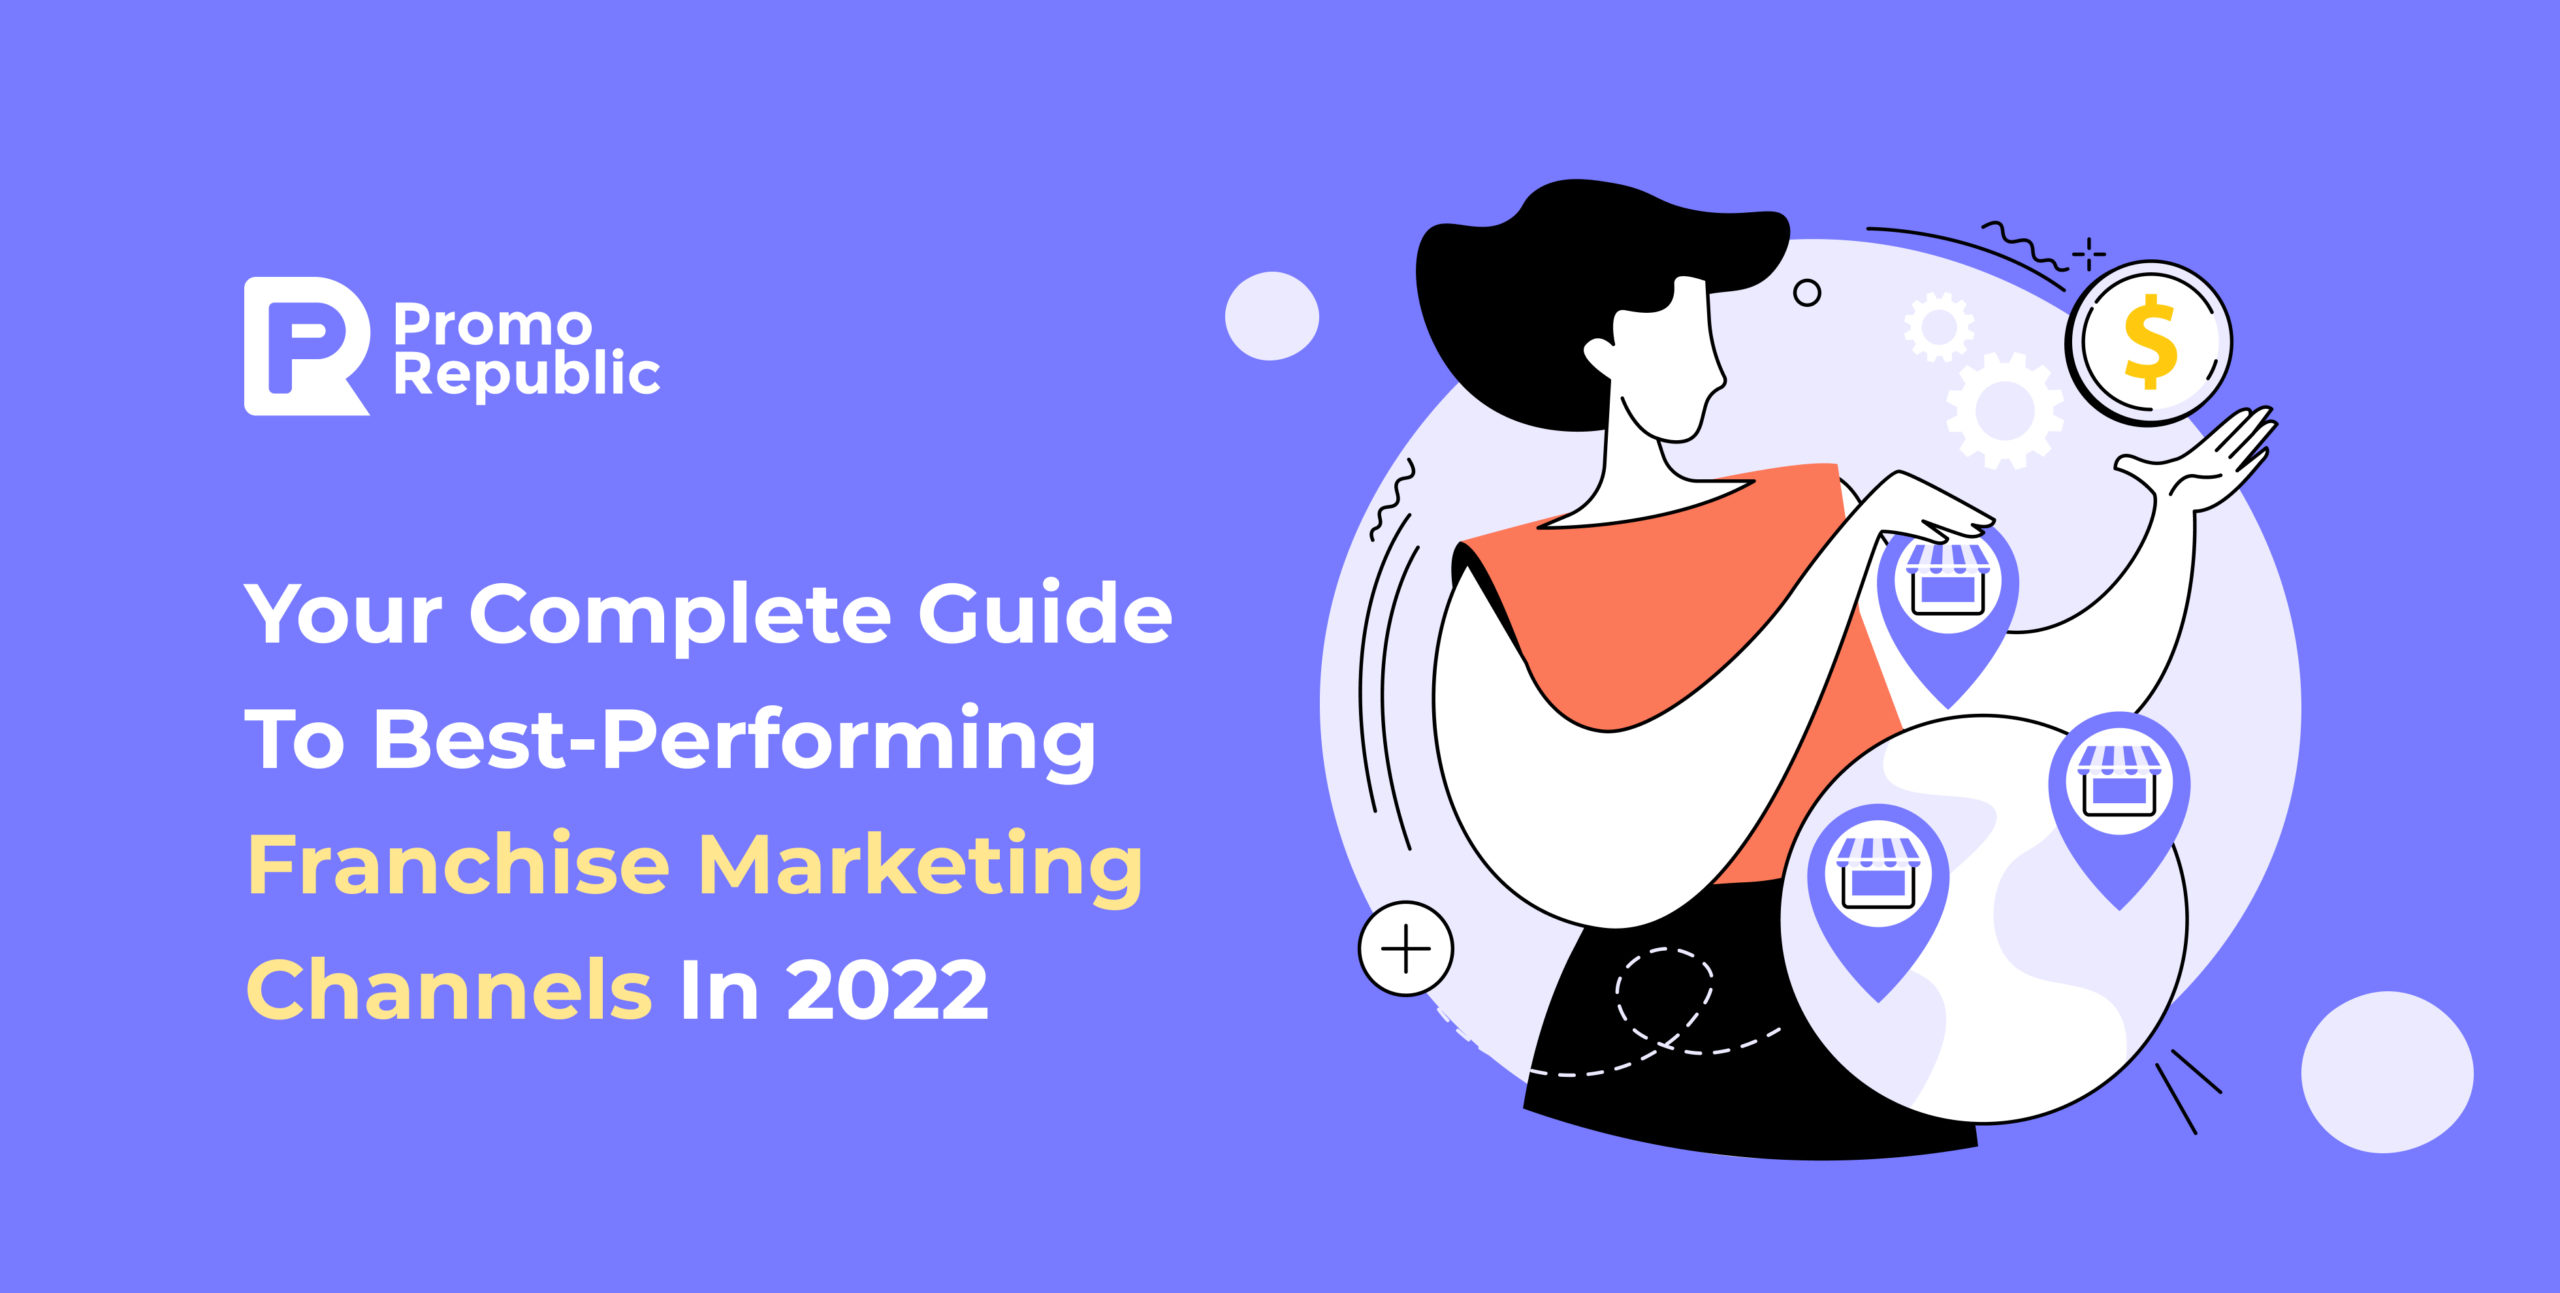 Franchise Digital Marketing: Complete Guide to The Best-Performing